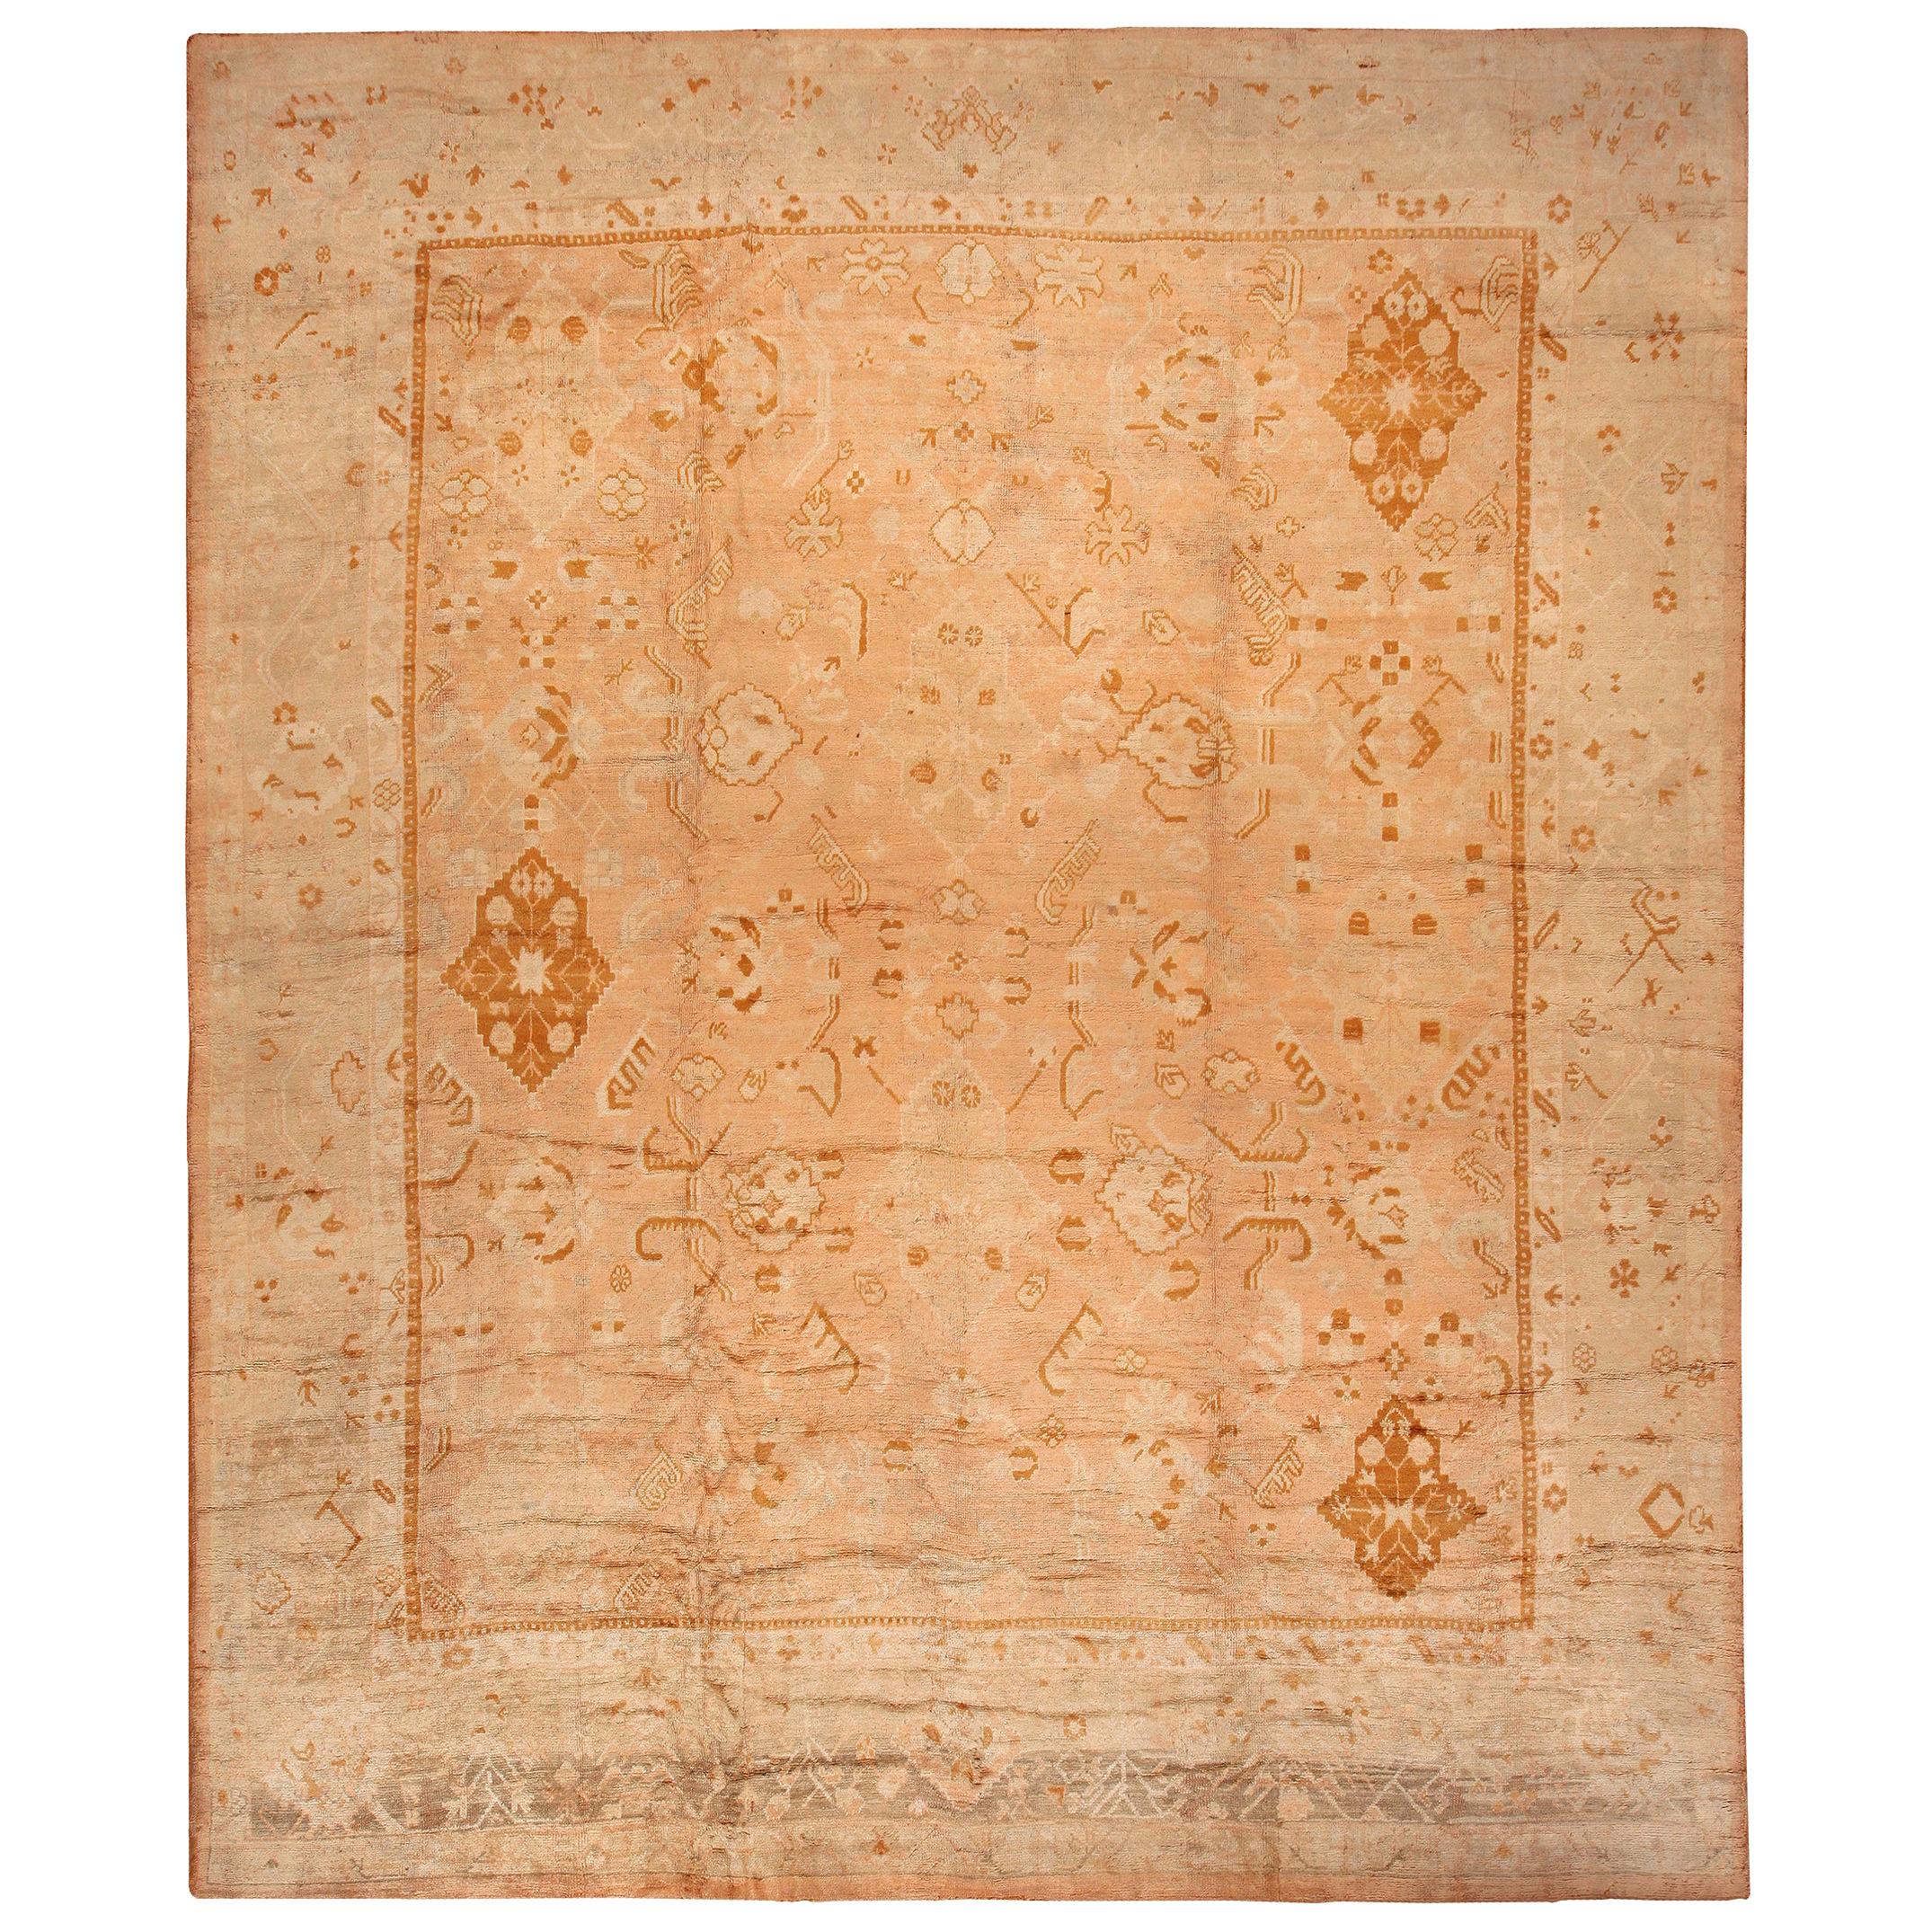 Nazmiyal Collection Antique Turkish Oushak Rug. Size: 14 ft 10 in x 17 ft 7 in